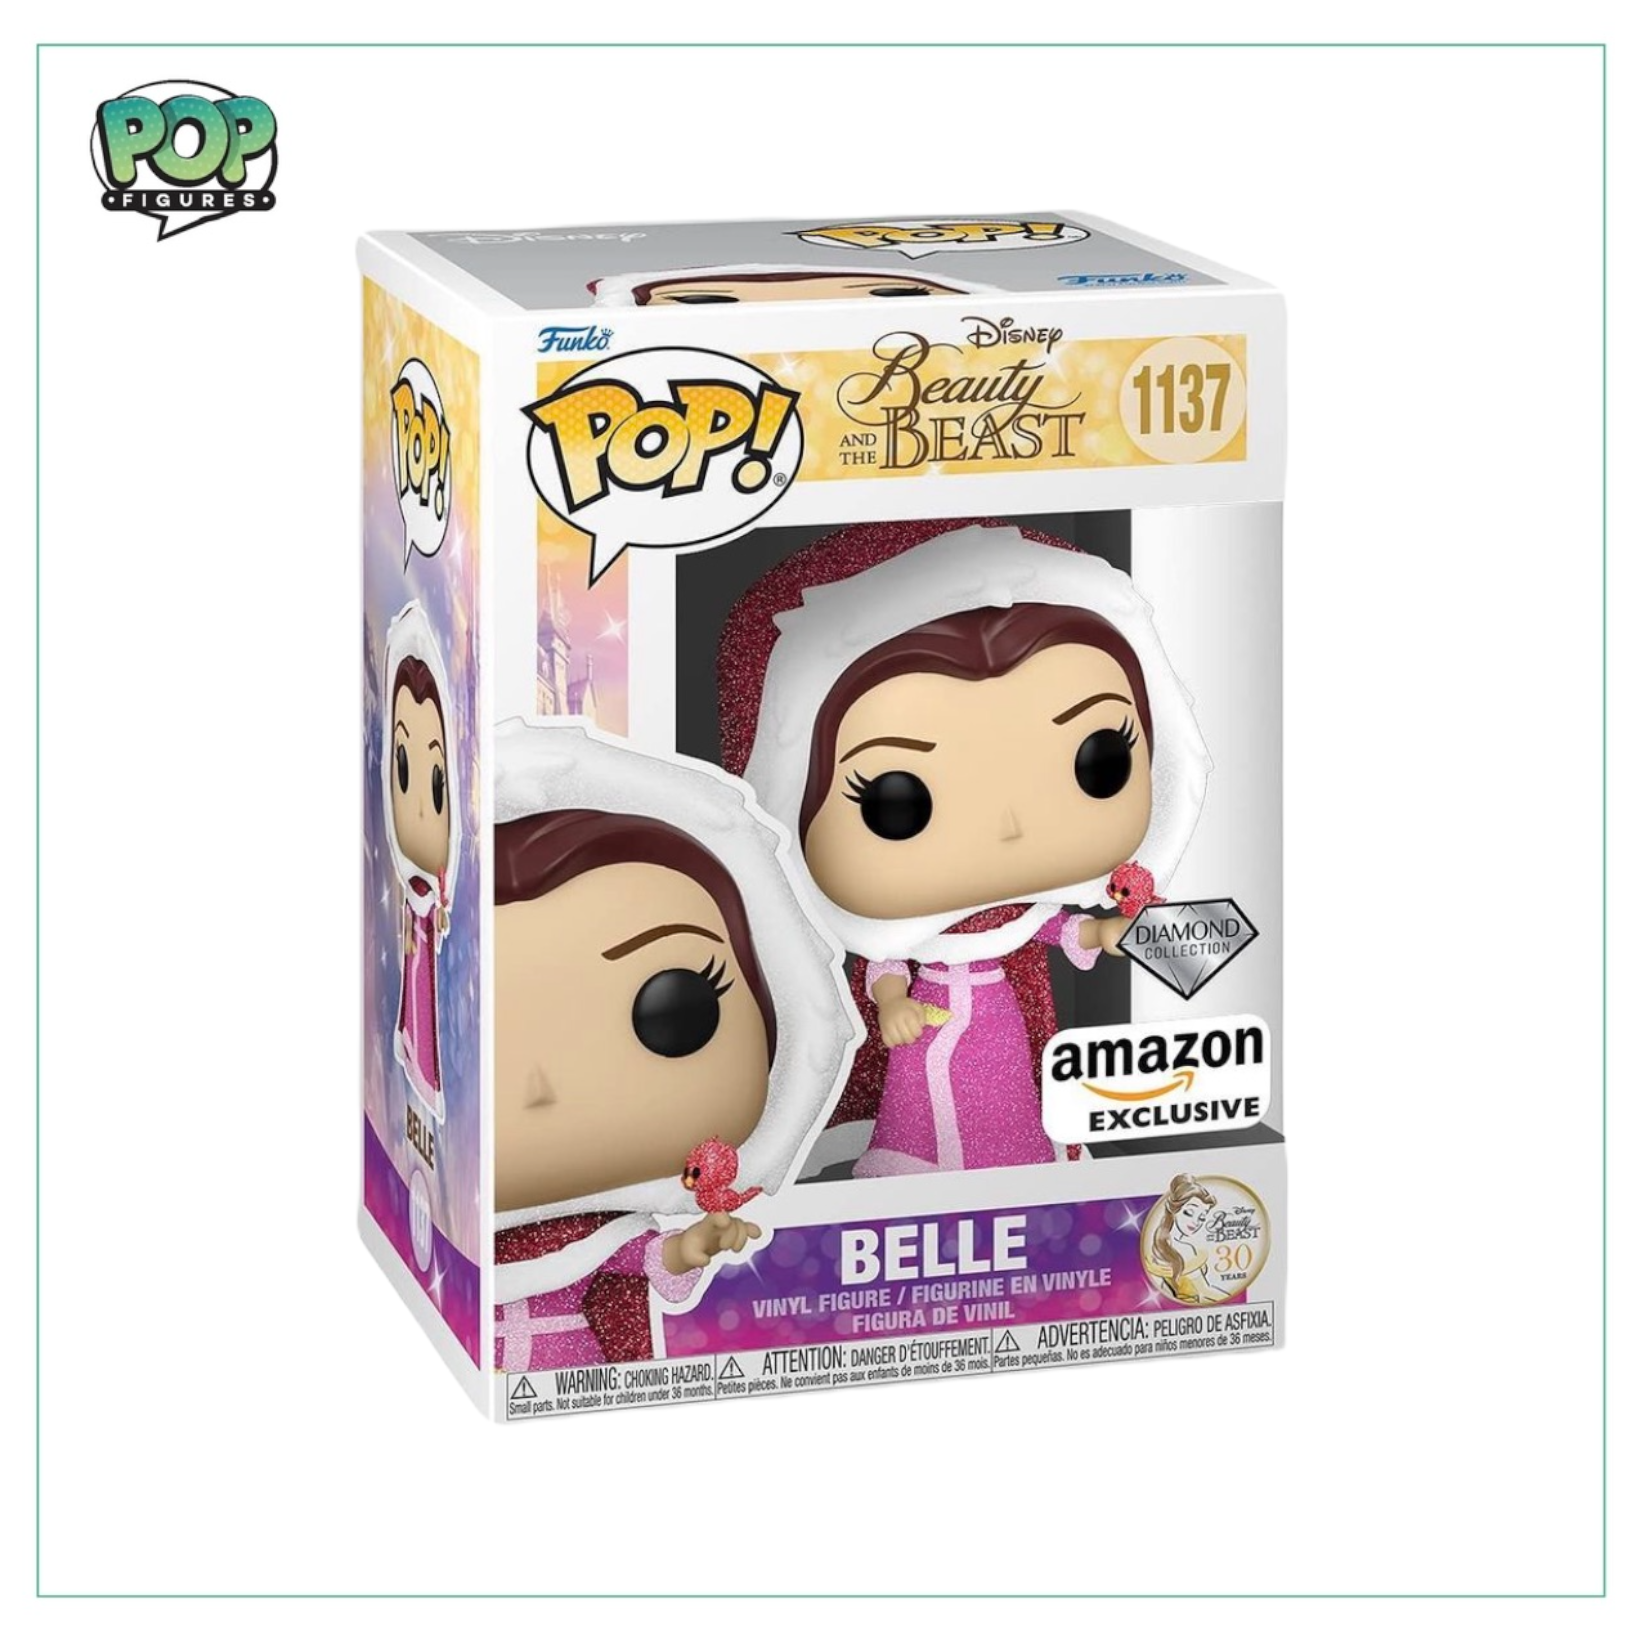 Belle (Diamond Collection) #1137 Funko Pop! Beauty and the Beast - Amazon Exclusive